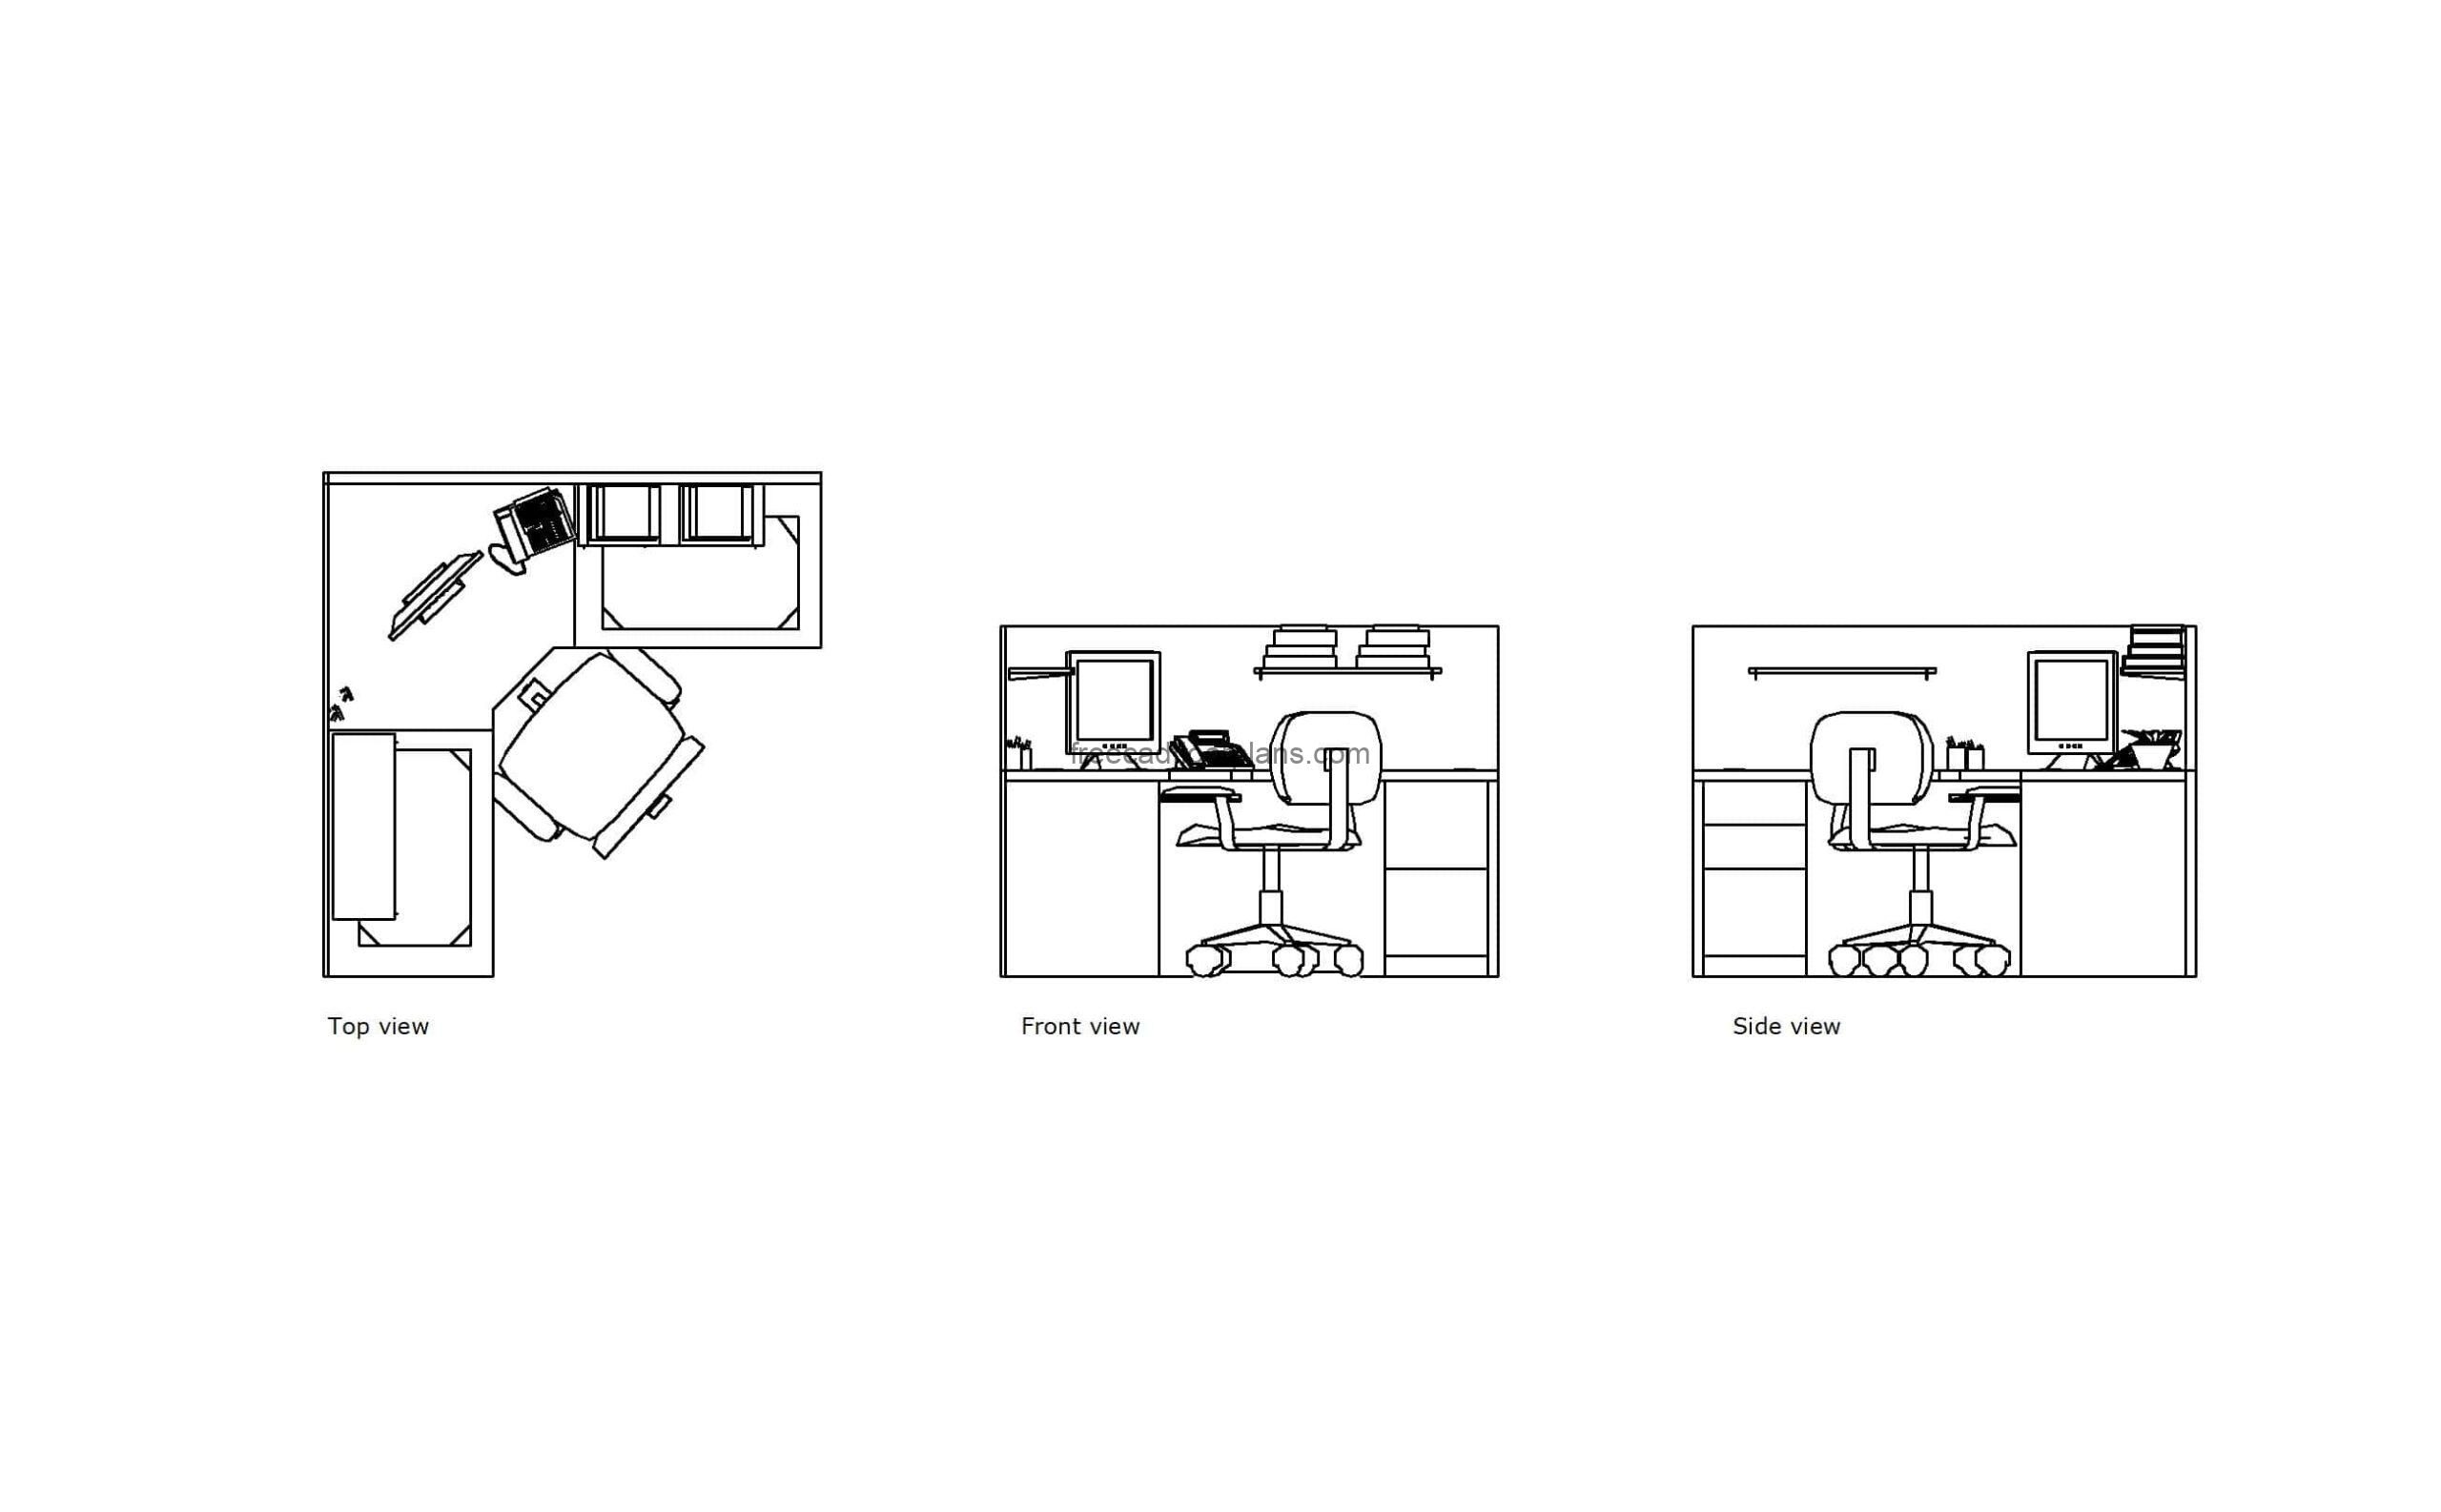 autocad drawing of a 6x6 ft. office cubicle, plan and elevation 2d views, dwg file free for download